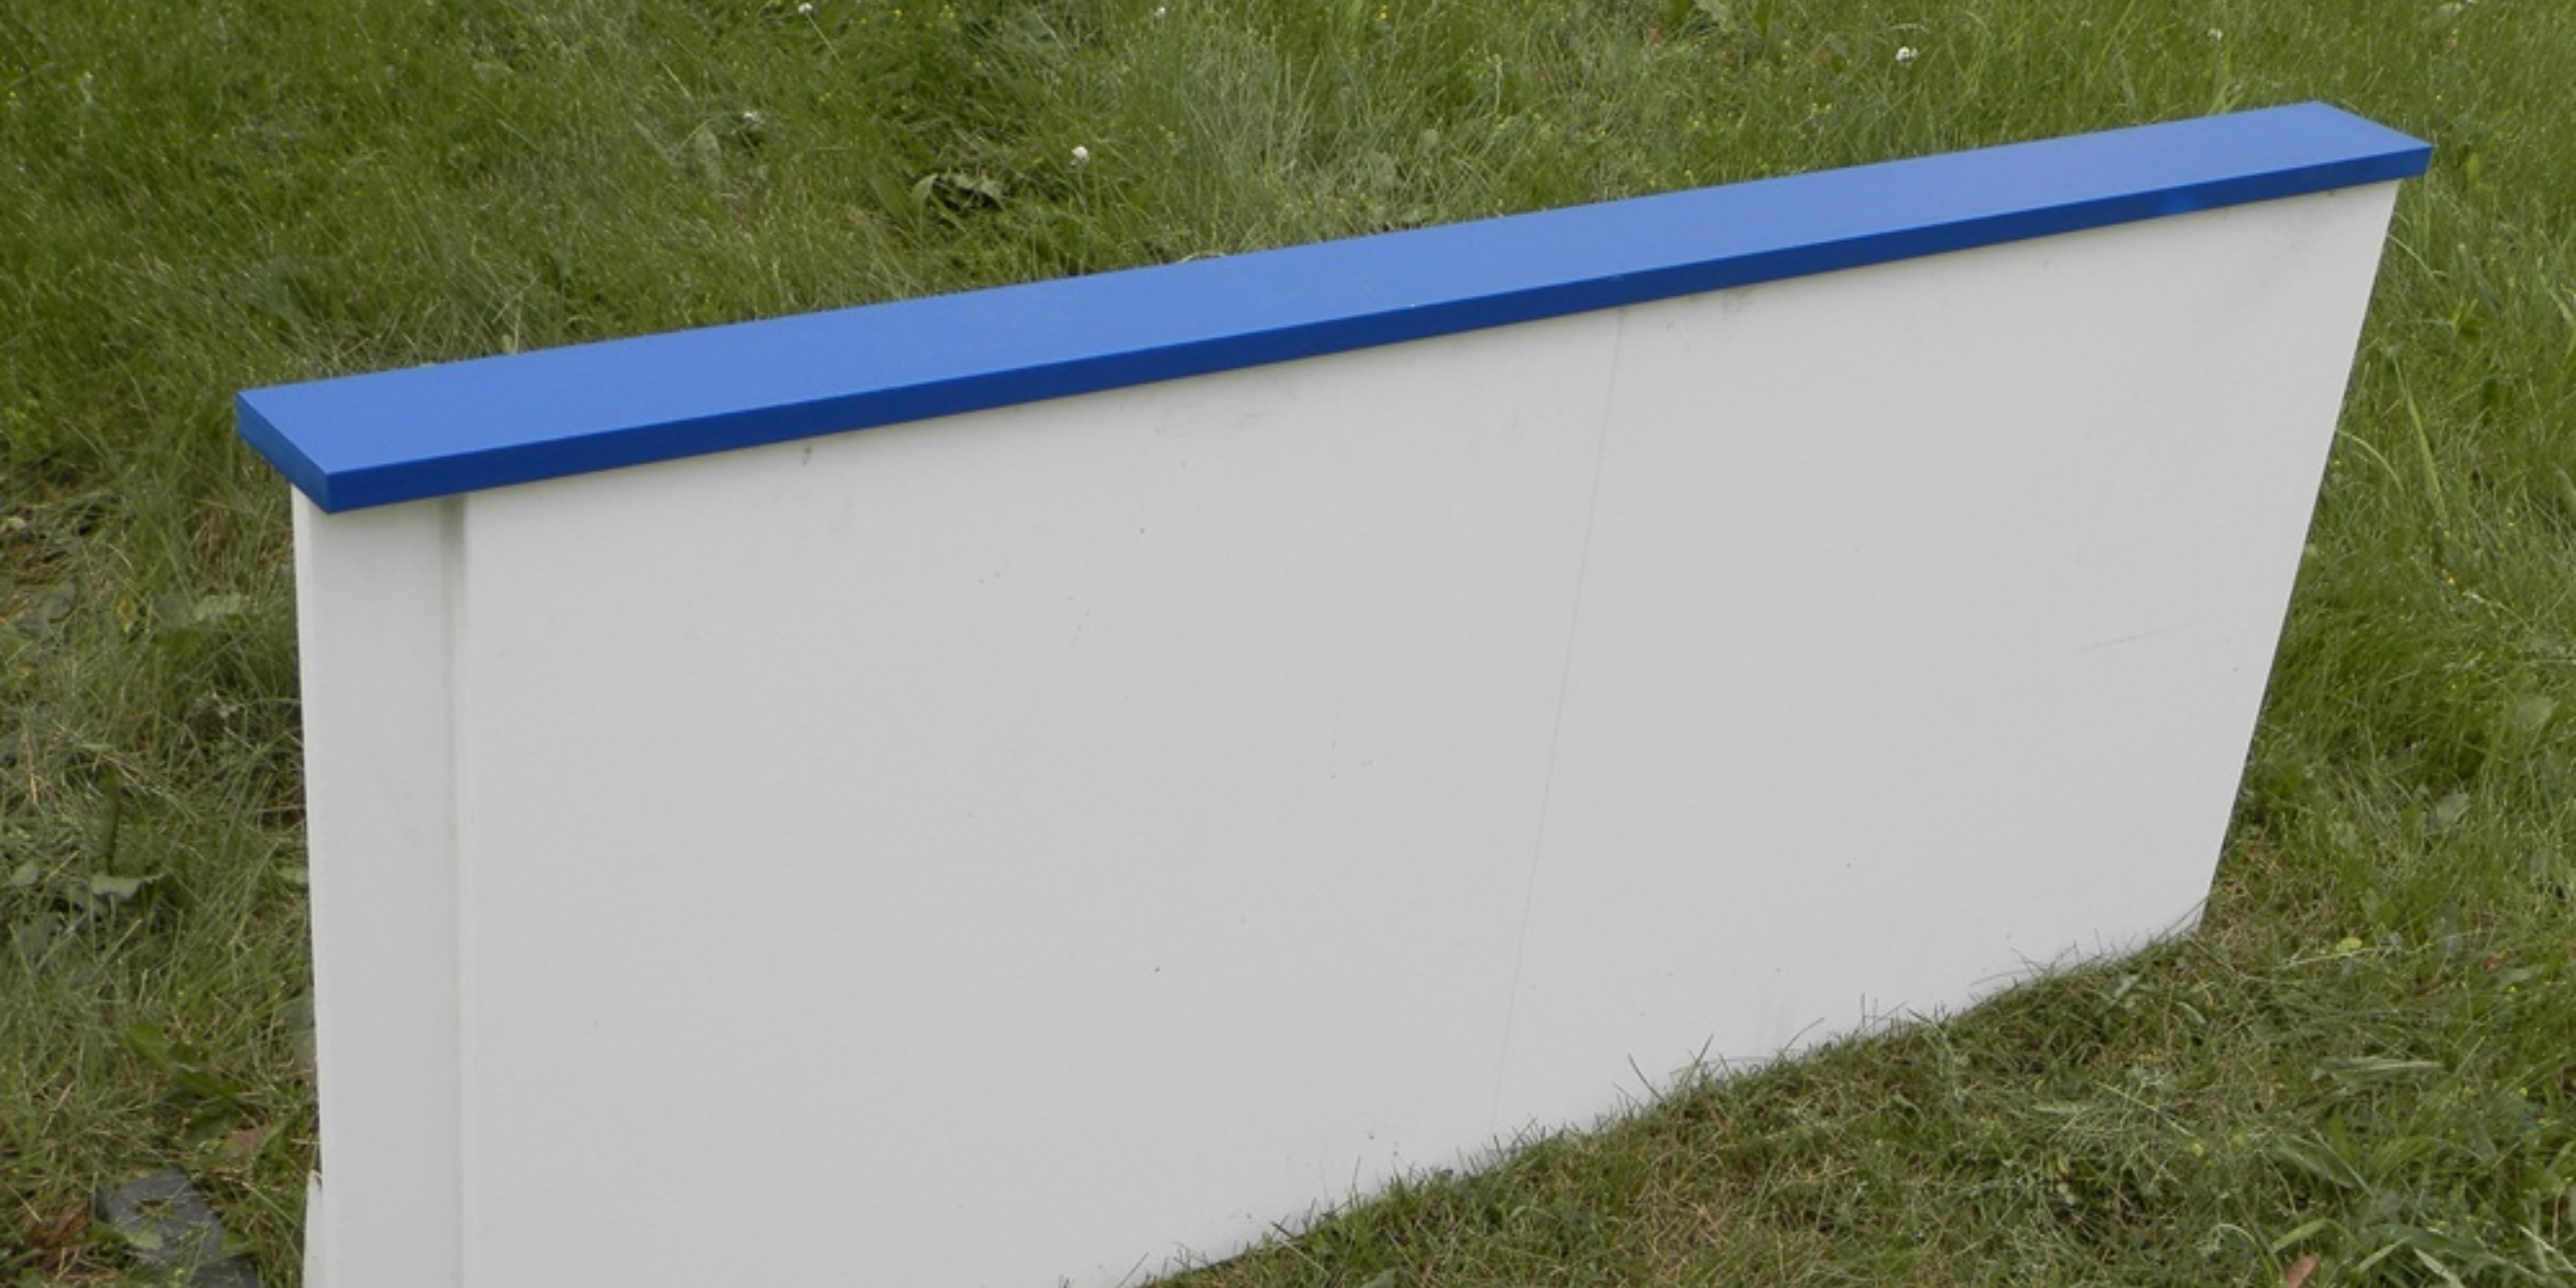 Iron Sleek Rink Boards are easily adapted blue rap rail